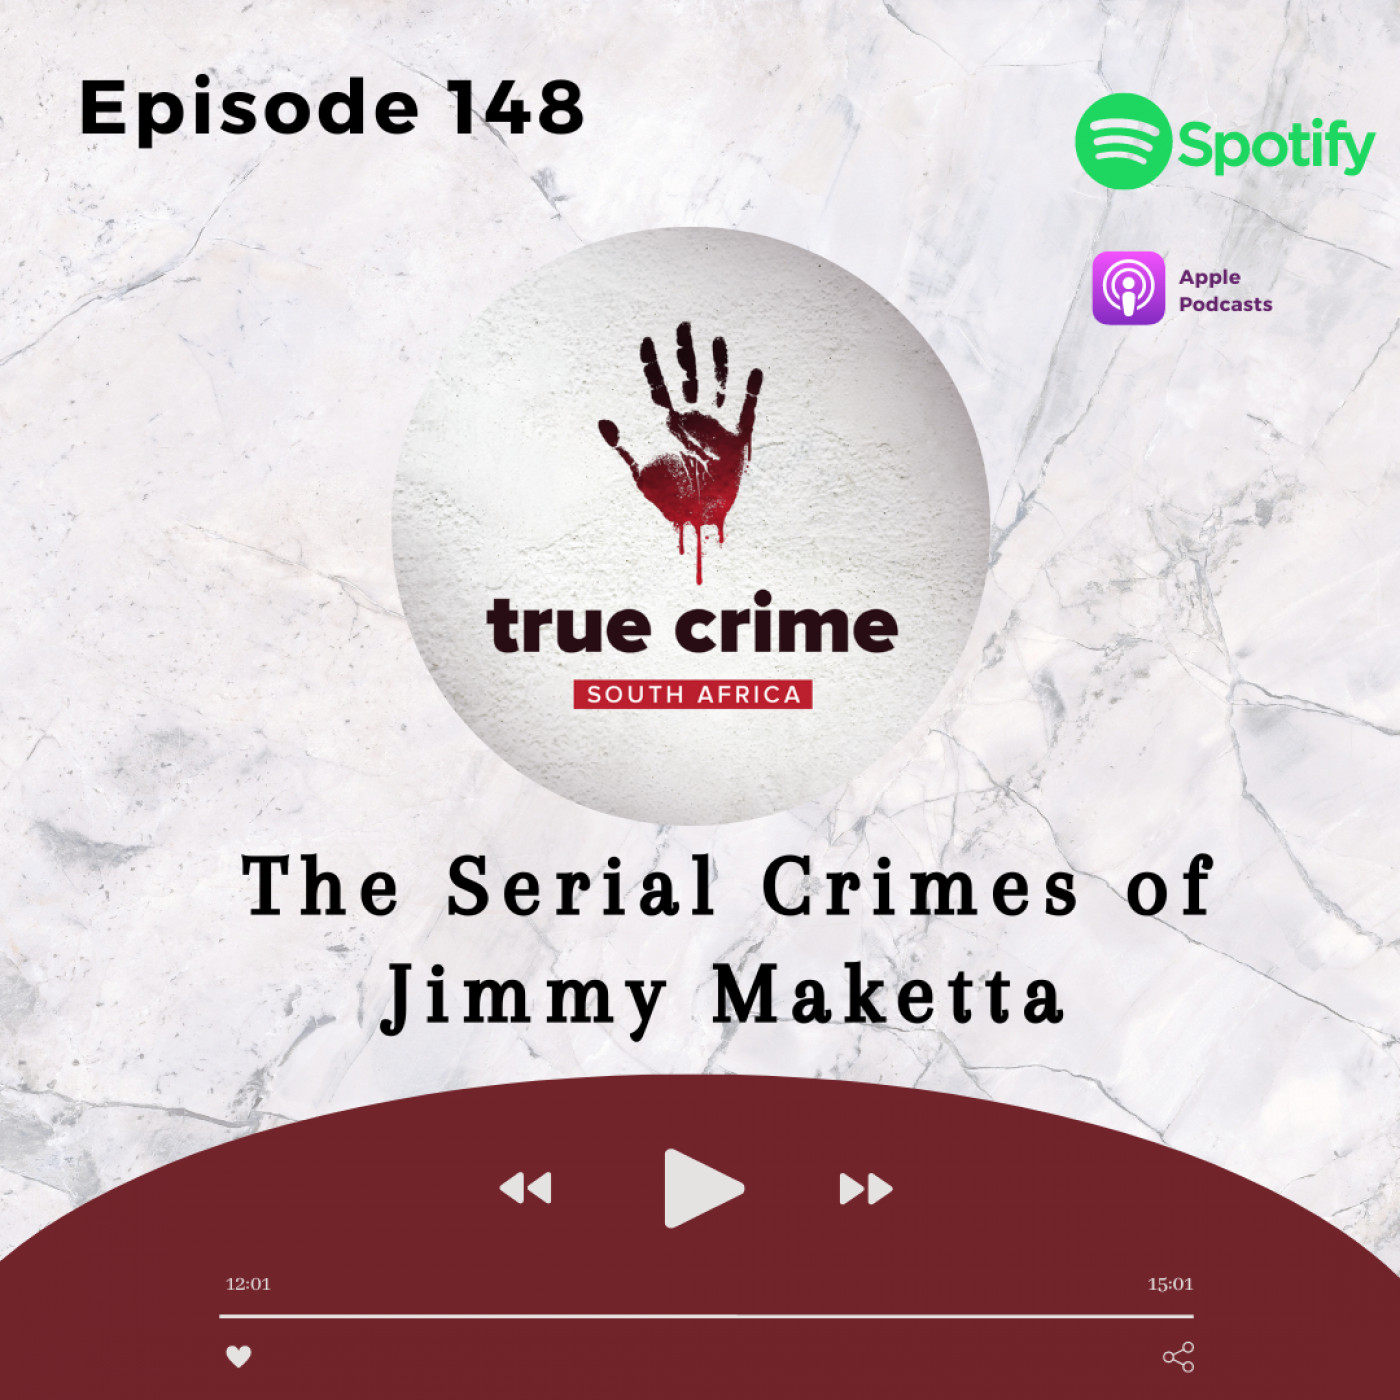 Episode 148 The Serial Crimes of Jimmy Maketta